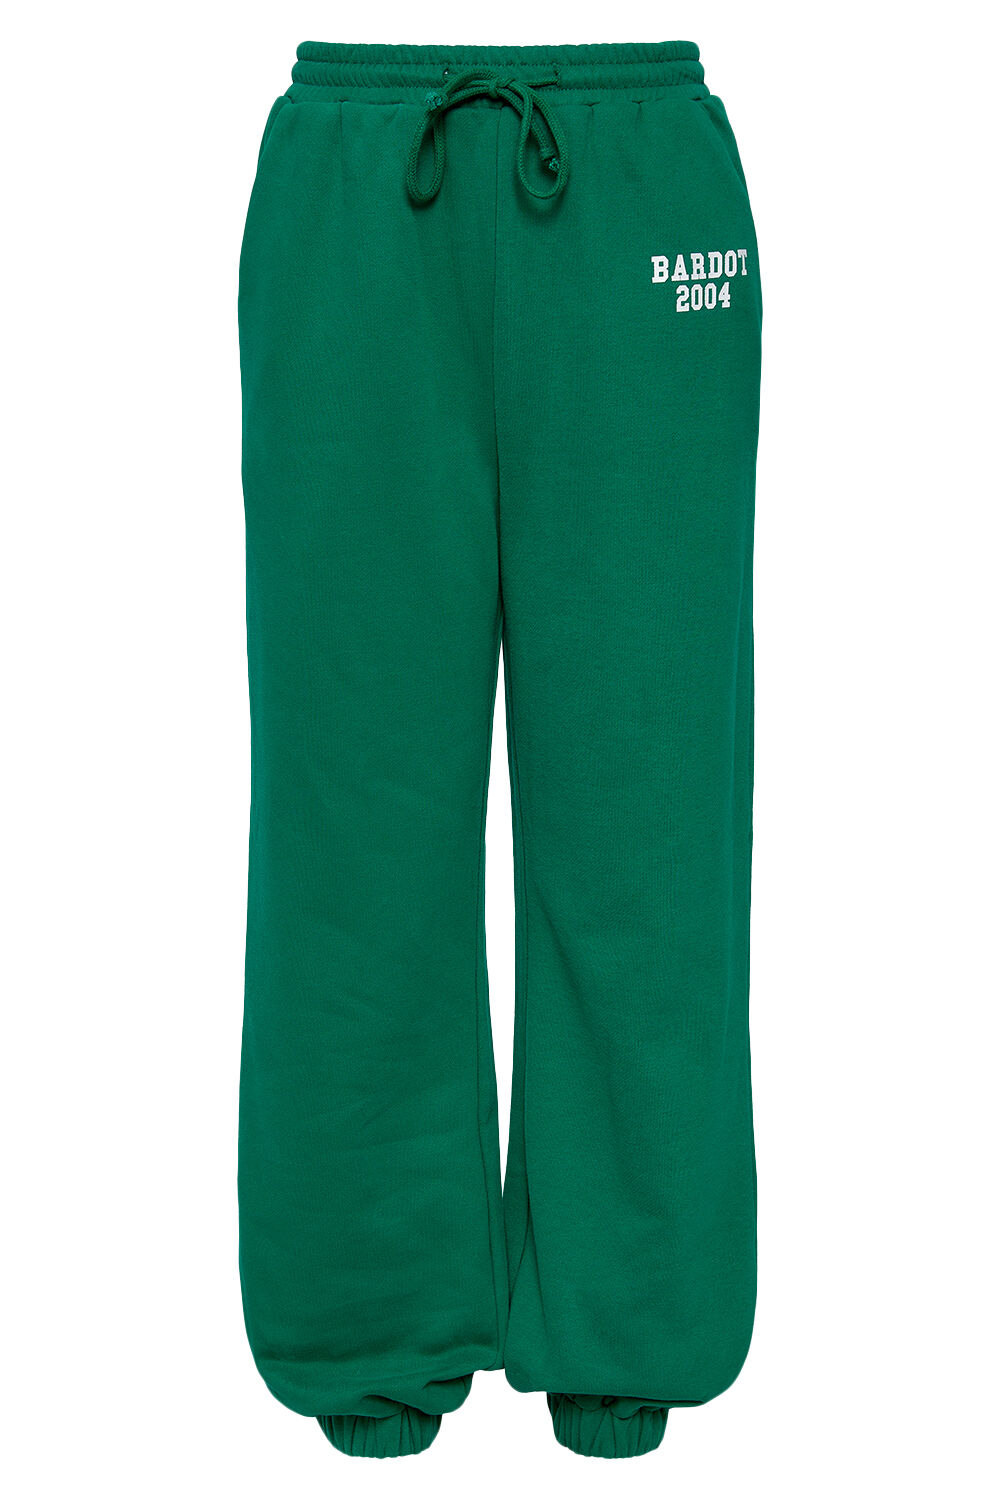 TRACK SWEAT PANT in colour DEEP GRASS GREEN